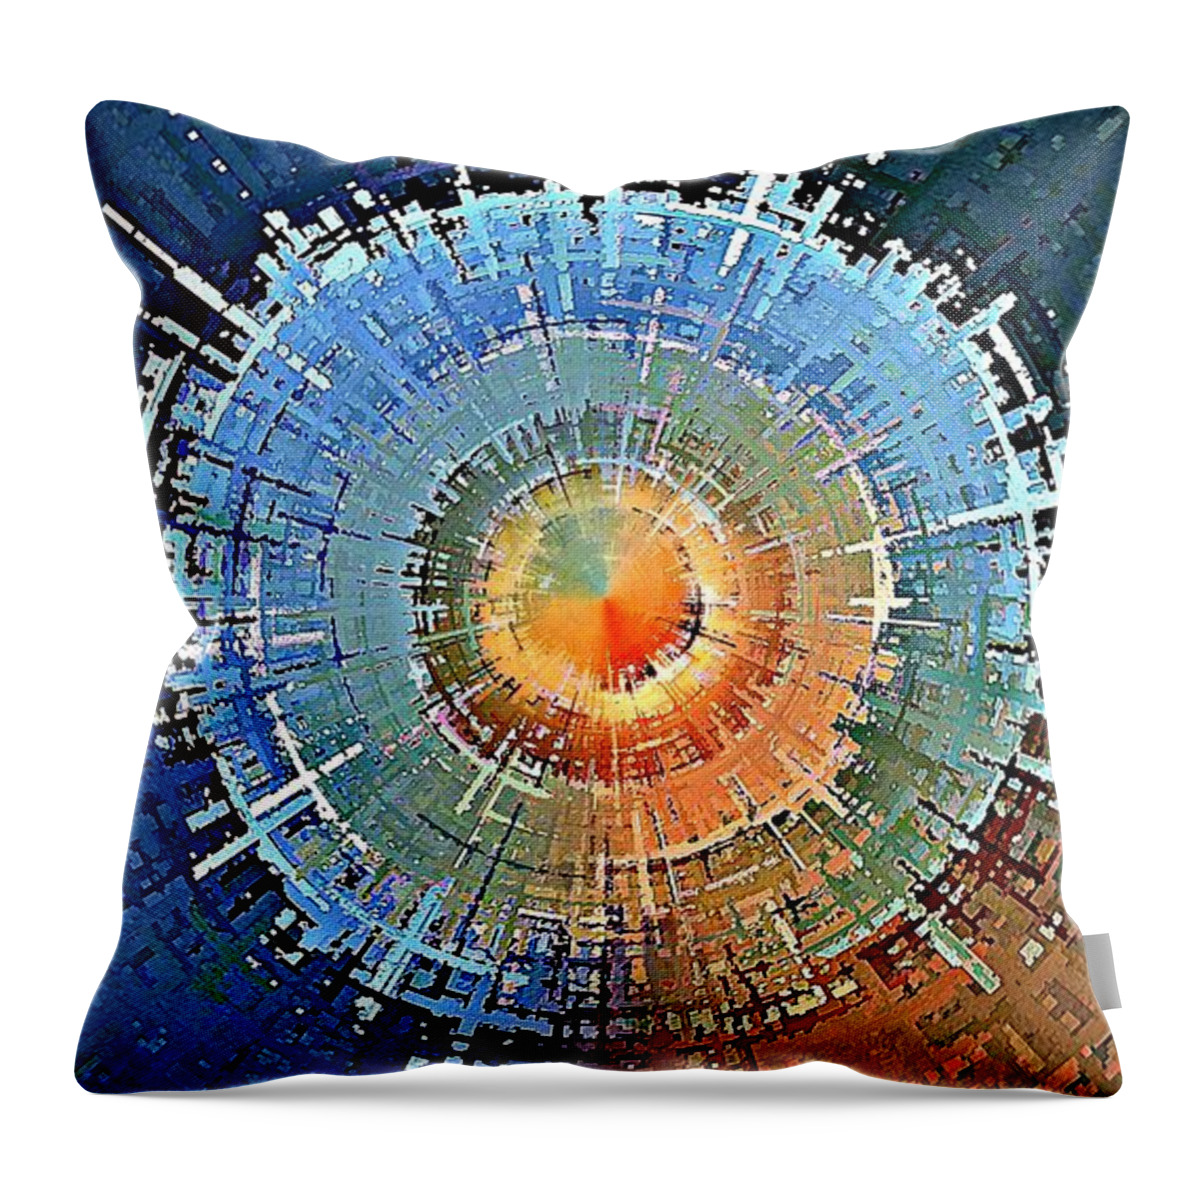 Star Throw Pillow featuring the digital art Alectrona by David Manlove